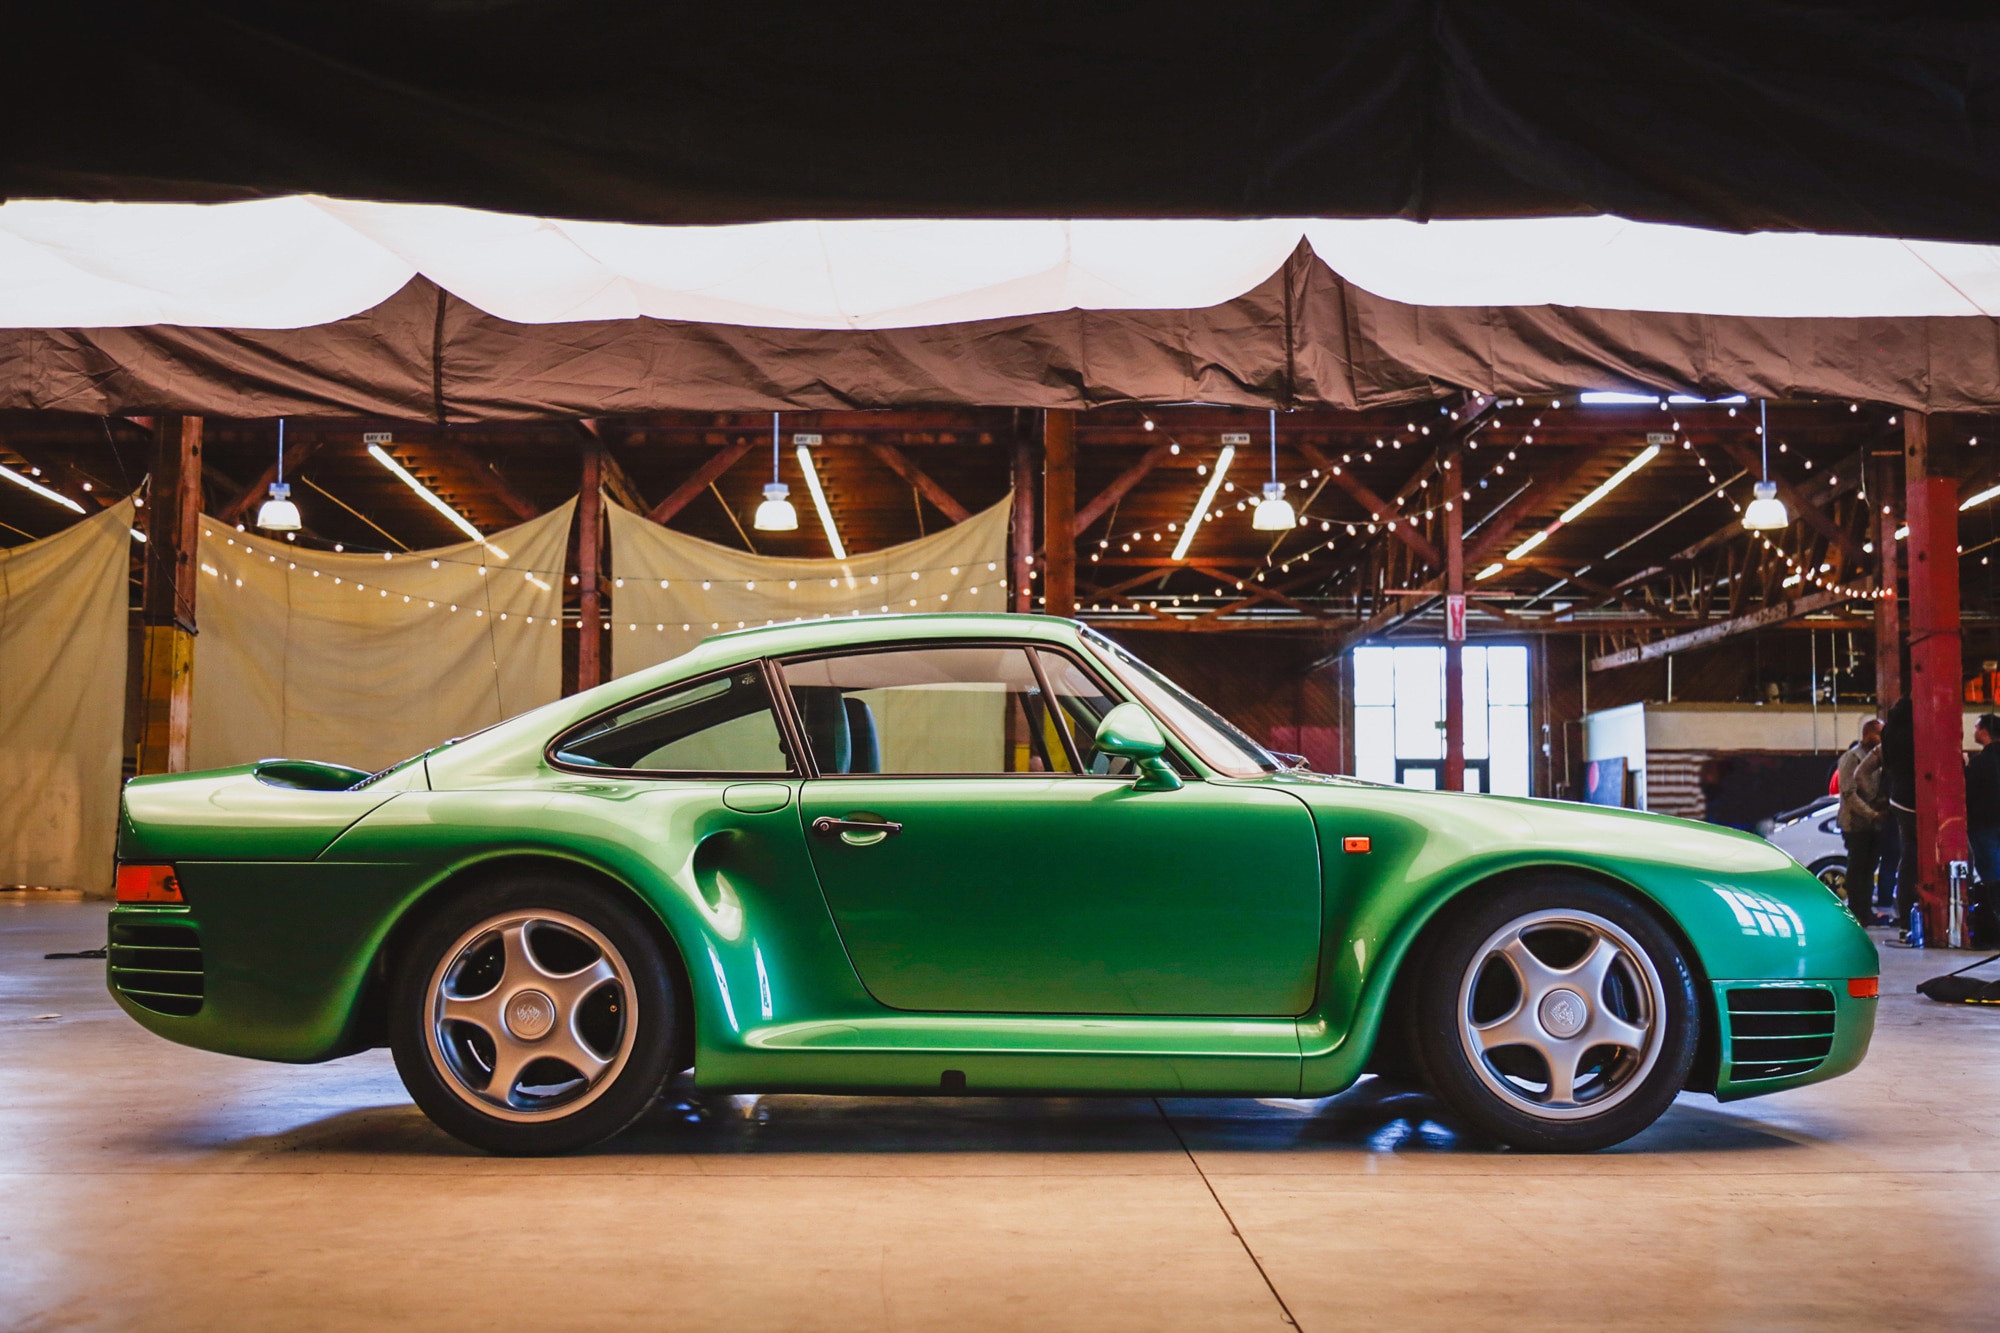 Green Canepa-modified Porsche 959 profile shot at Luftgekundefinedhlt in Los Angeles in 2017